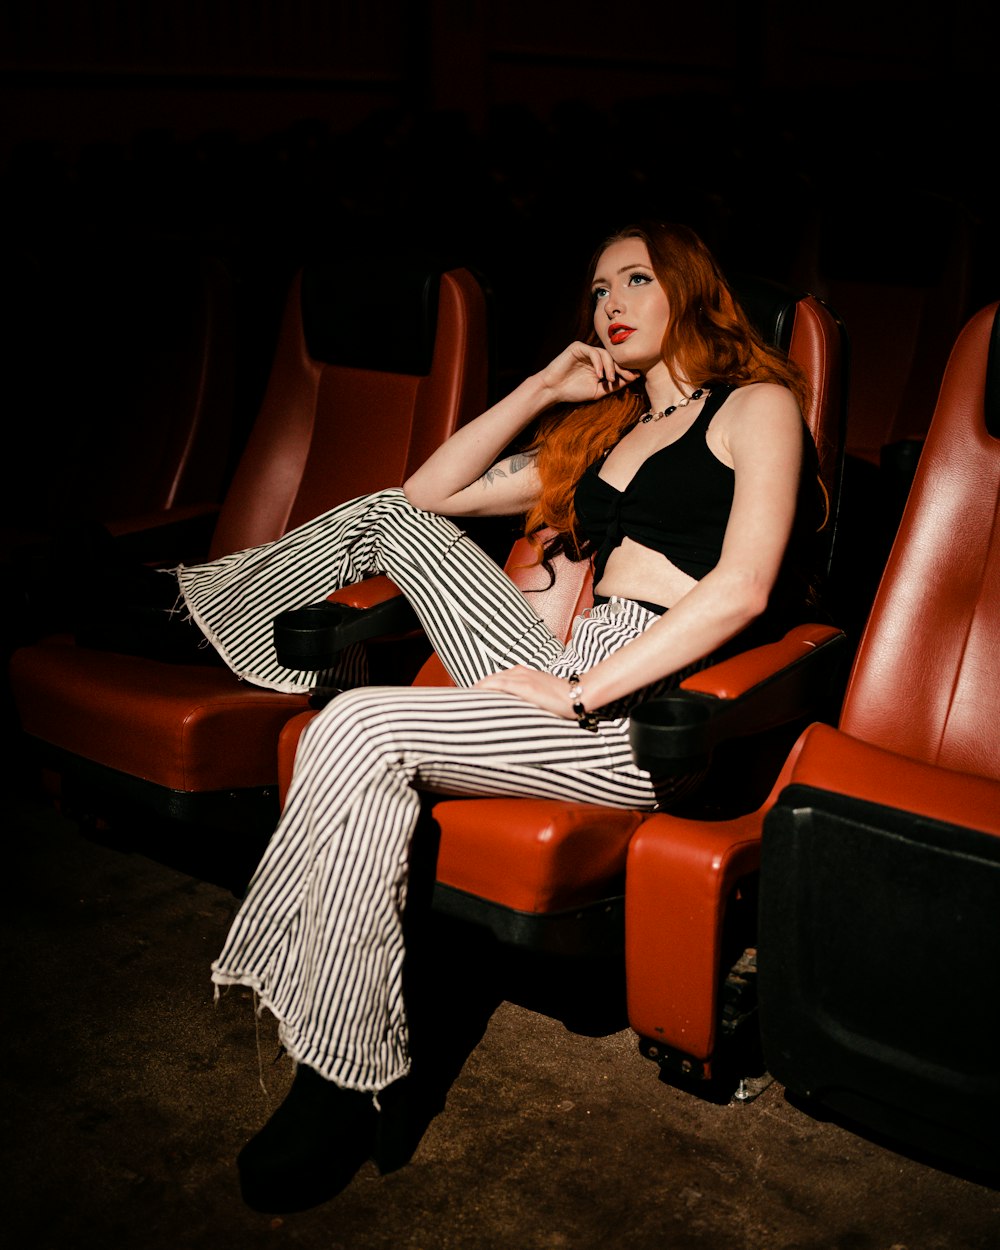 a woman with red hair sitting on a red chair